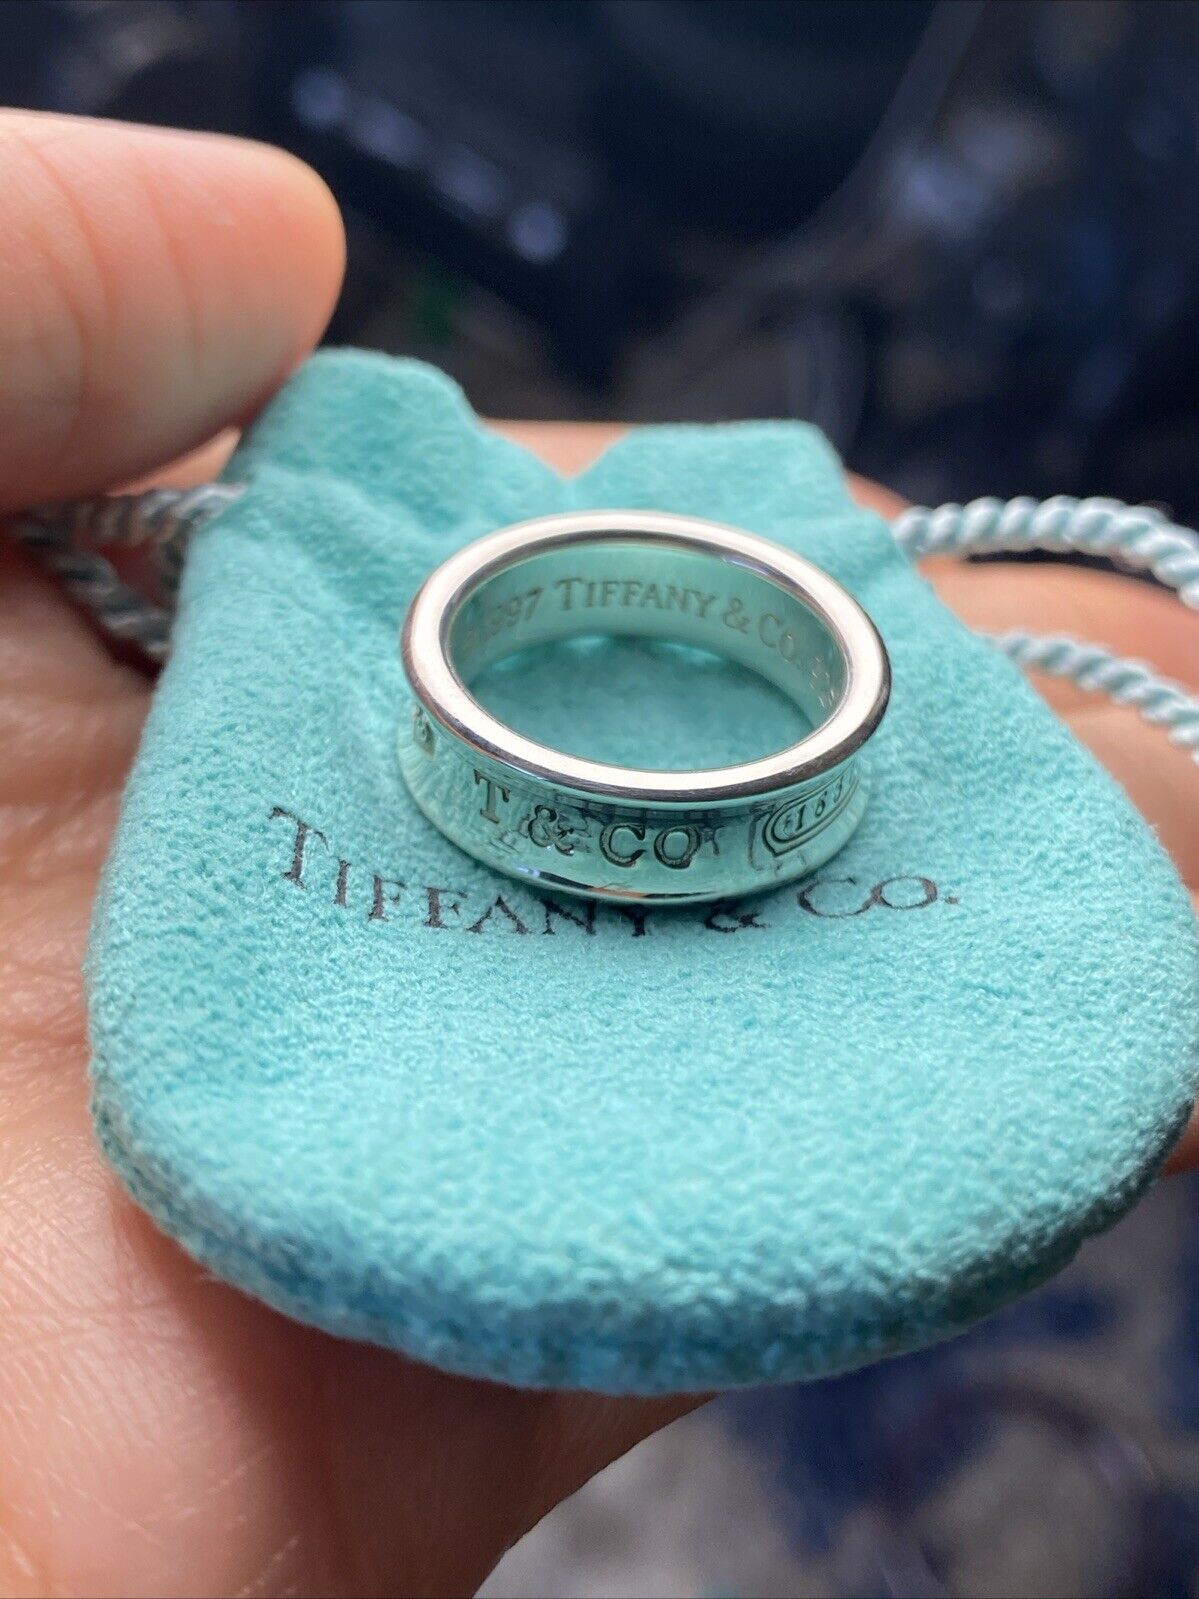 Tiffany & Co 1837 Ring Wide Band Sterling Silver Ring Size 7 ( Authentic)